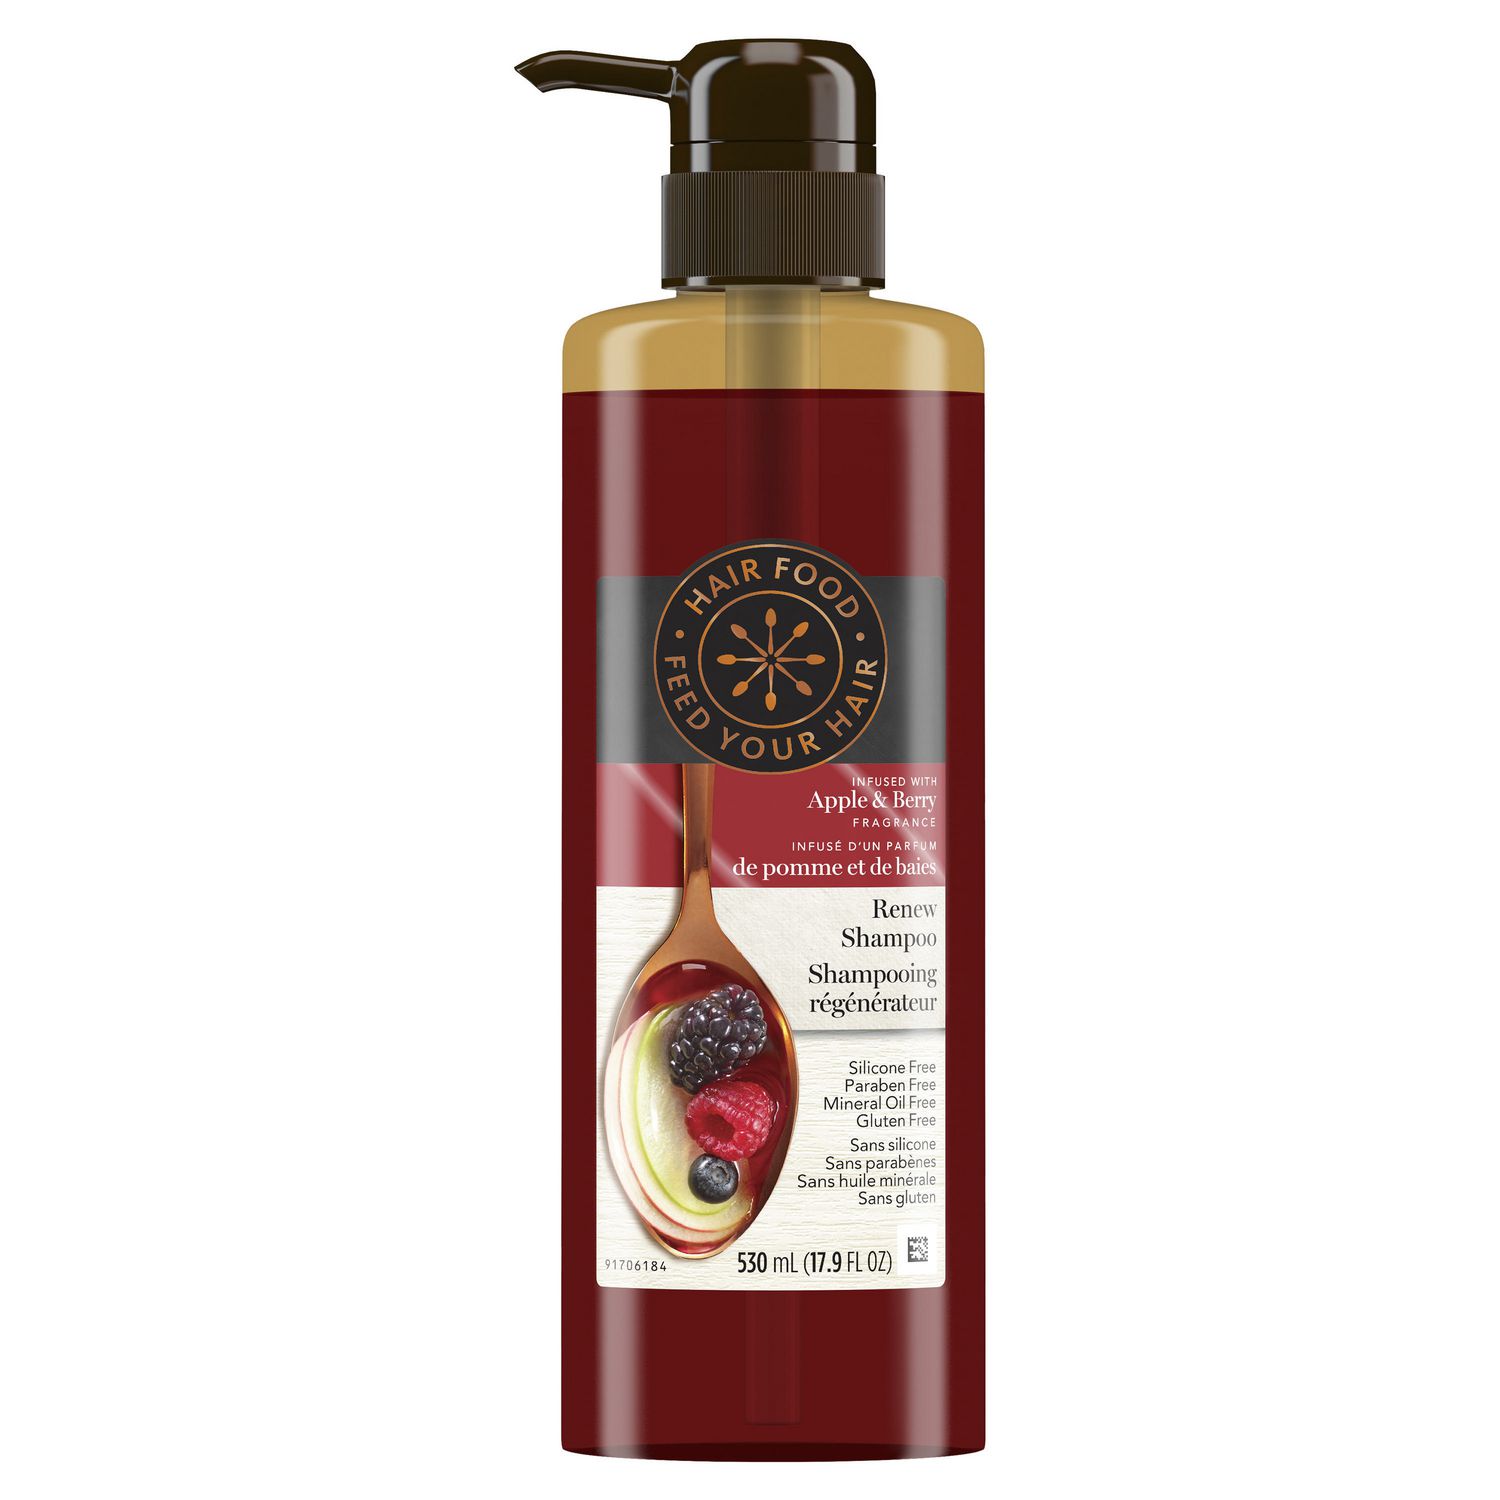 Hair Food Renew Shampoo Infused with Apple Berry Fragrance | Walmart Canada